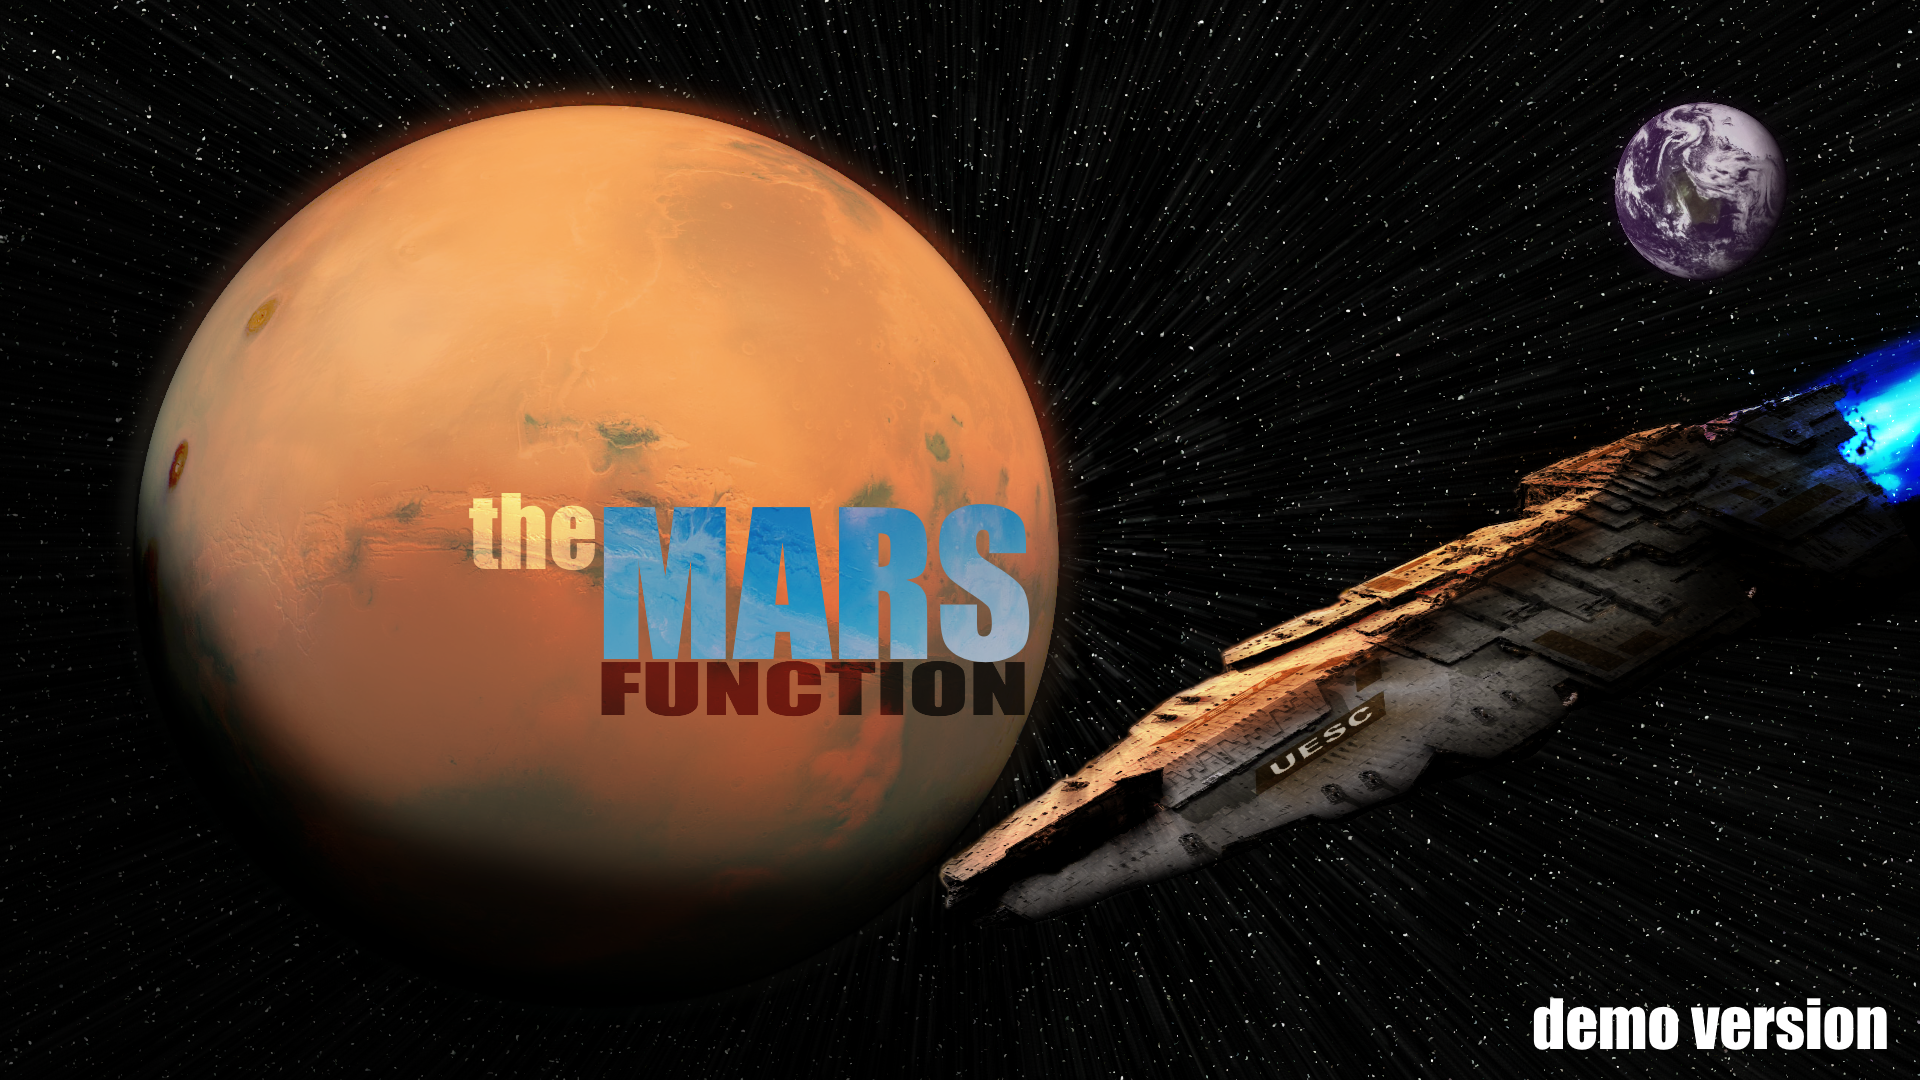 The Mars Function (concept)